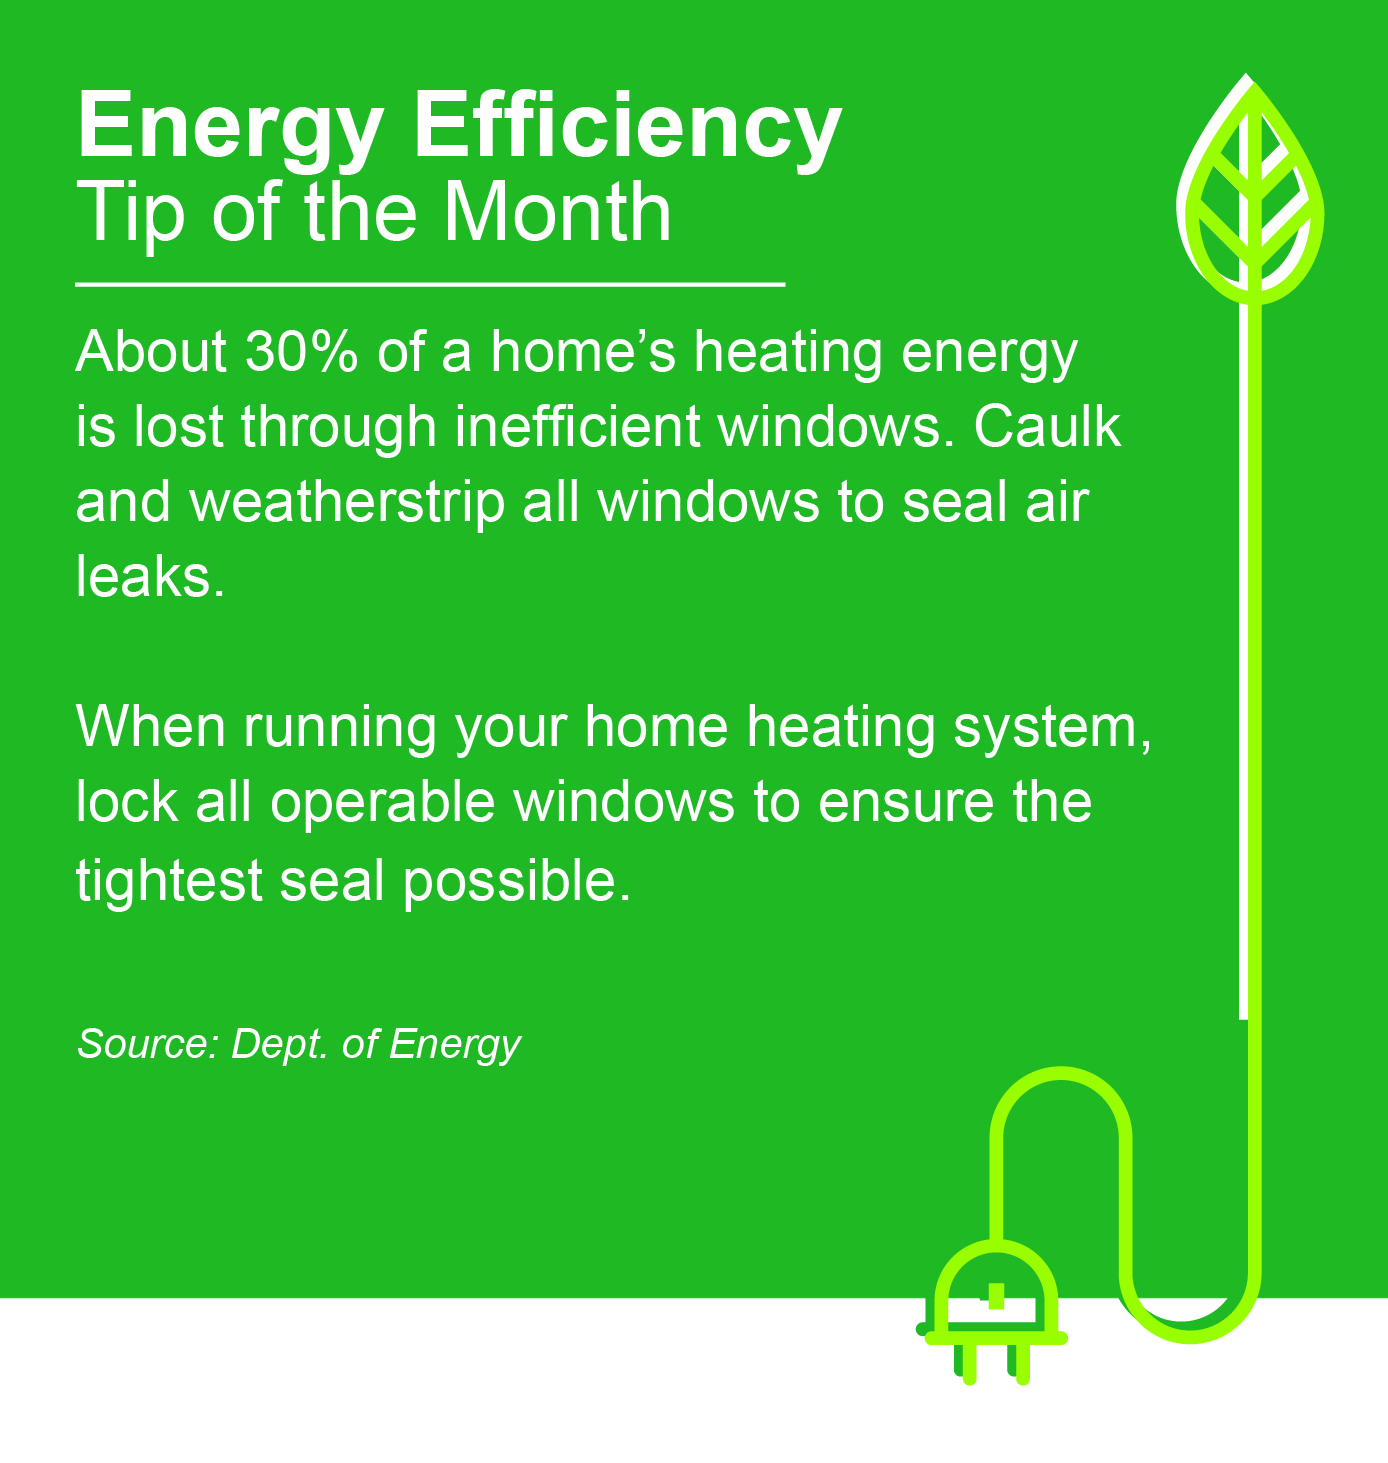 Energy Efficiency Tip of the Month: About 30% of a home's heating energy is lost through inefficient windows. Caulk and weatherstrip all windows to seal air leaks. When running your home heating system, lock all operable windows to ensure the tightest seal possible. Source: Dept. of Energy